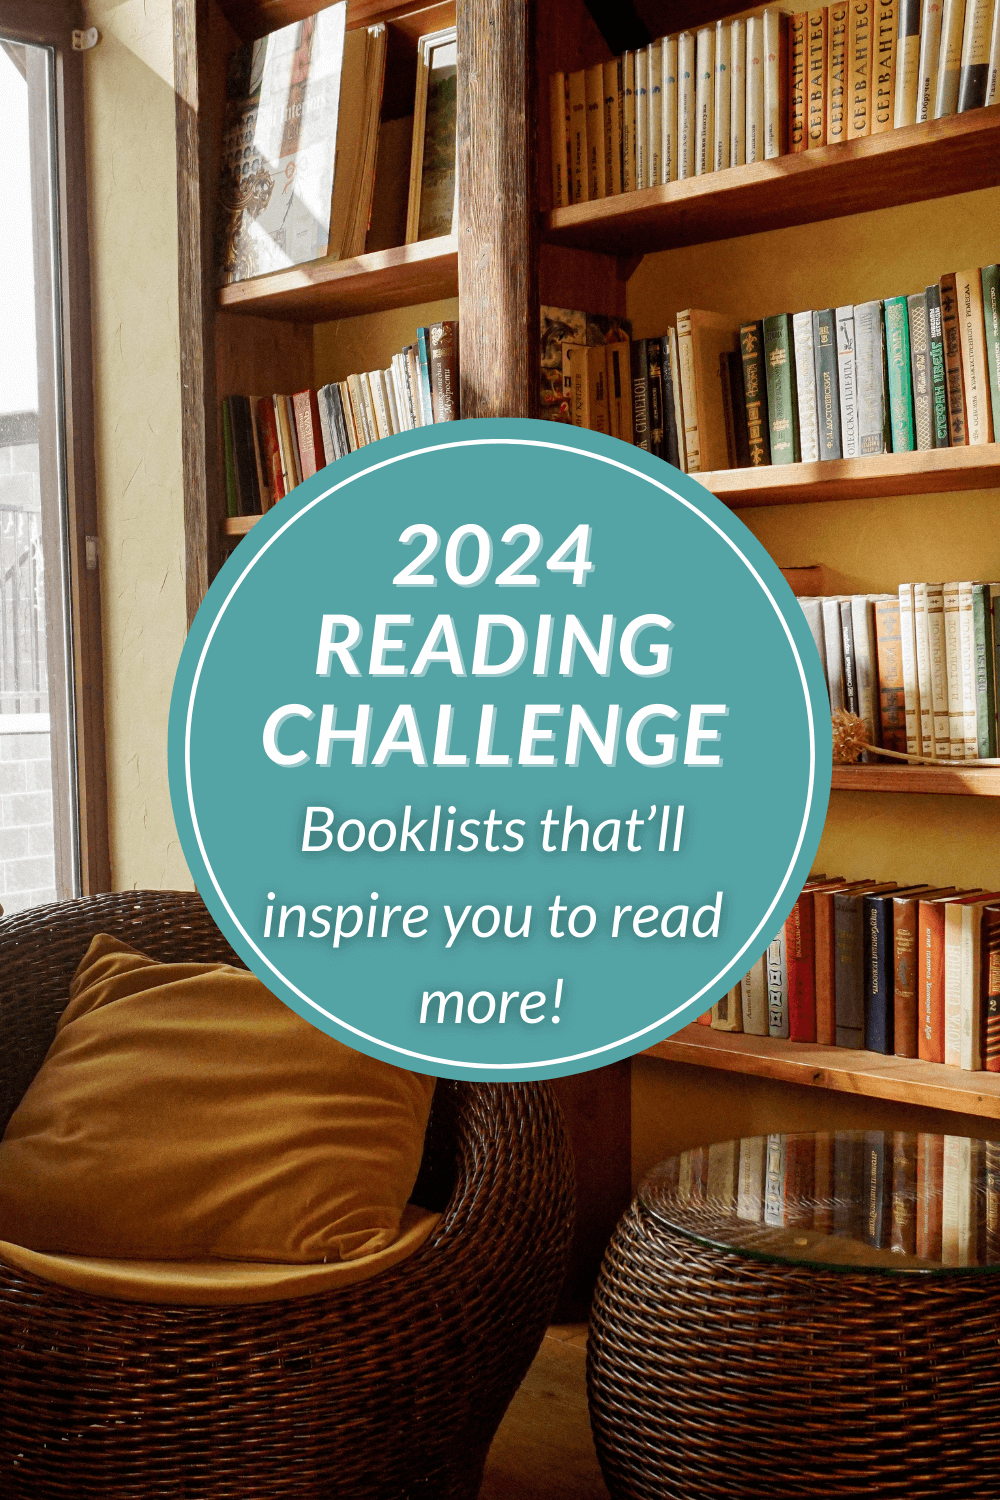 A cozy chair and a bookcase ready for the 2024 reading challenge.